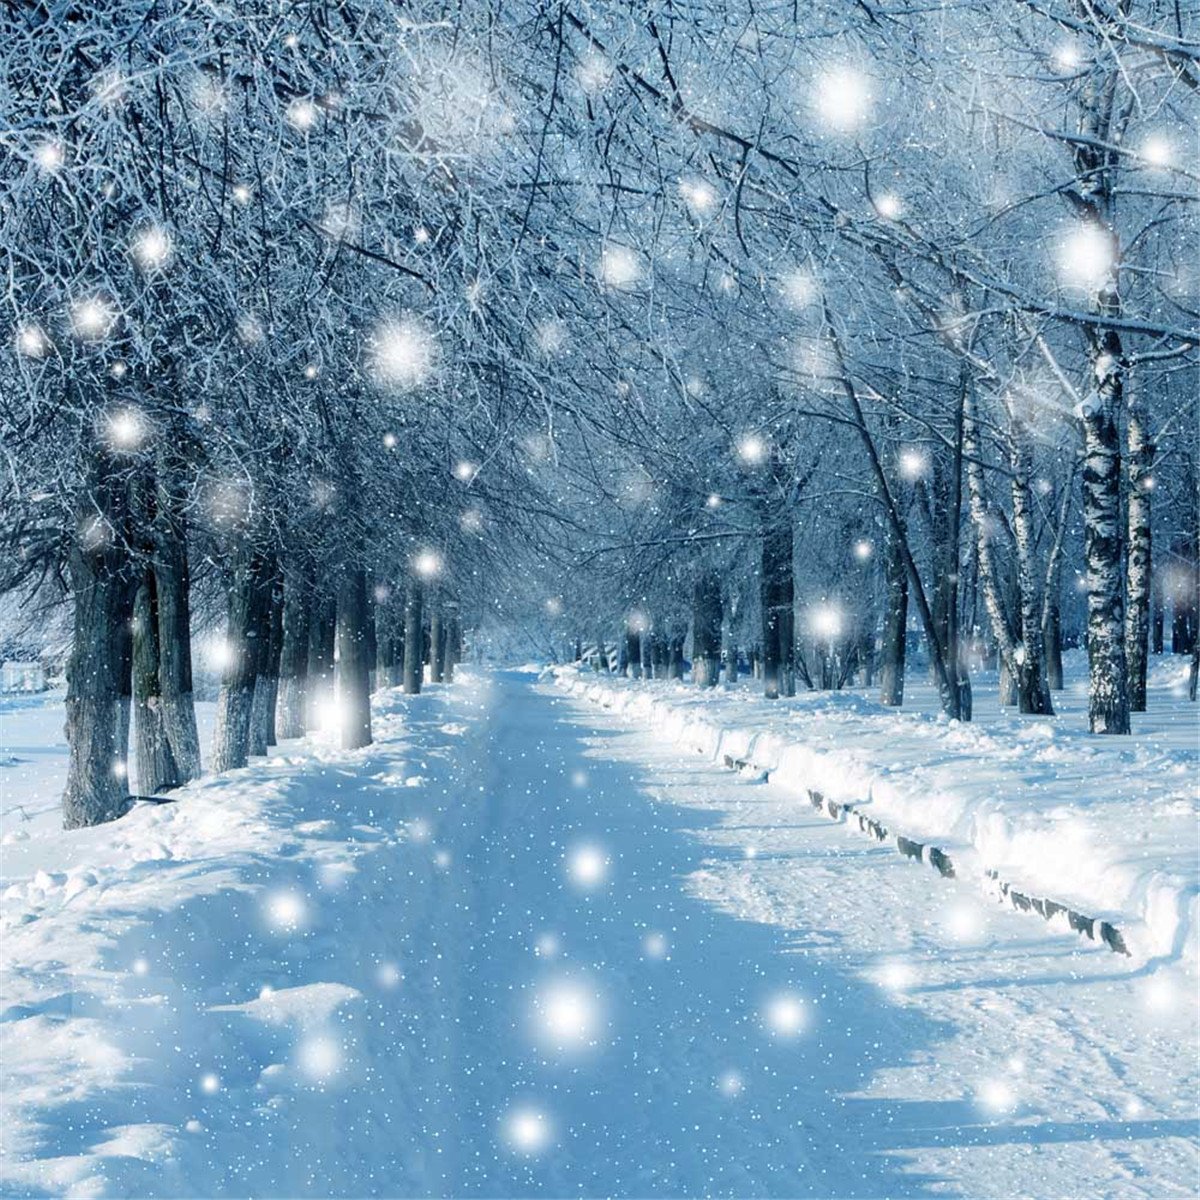 Snowy Christmas Backgrounds